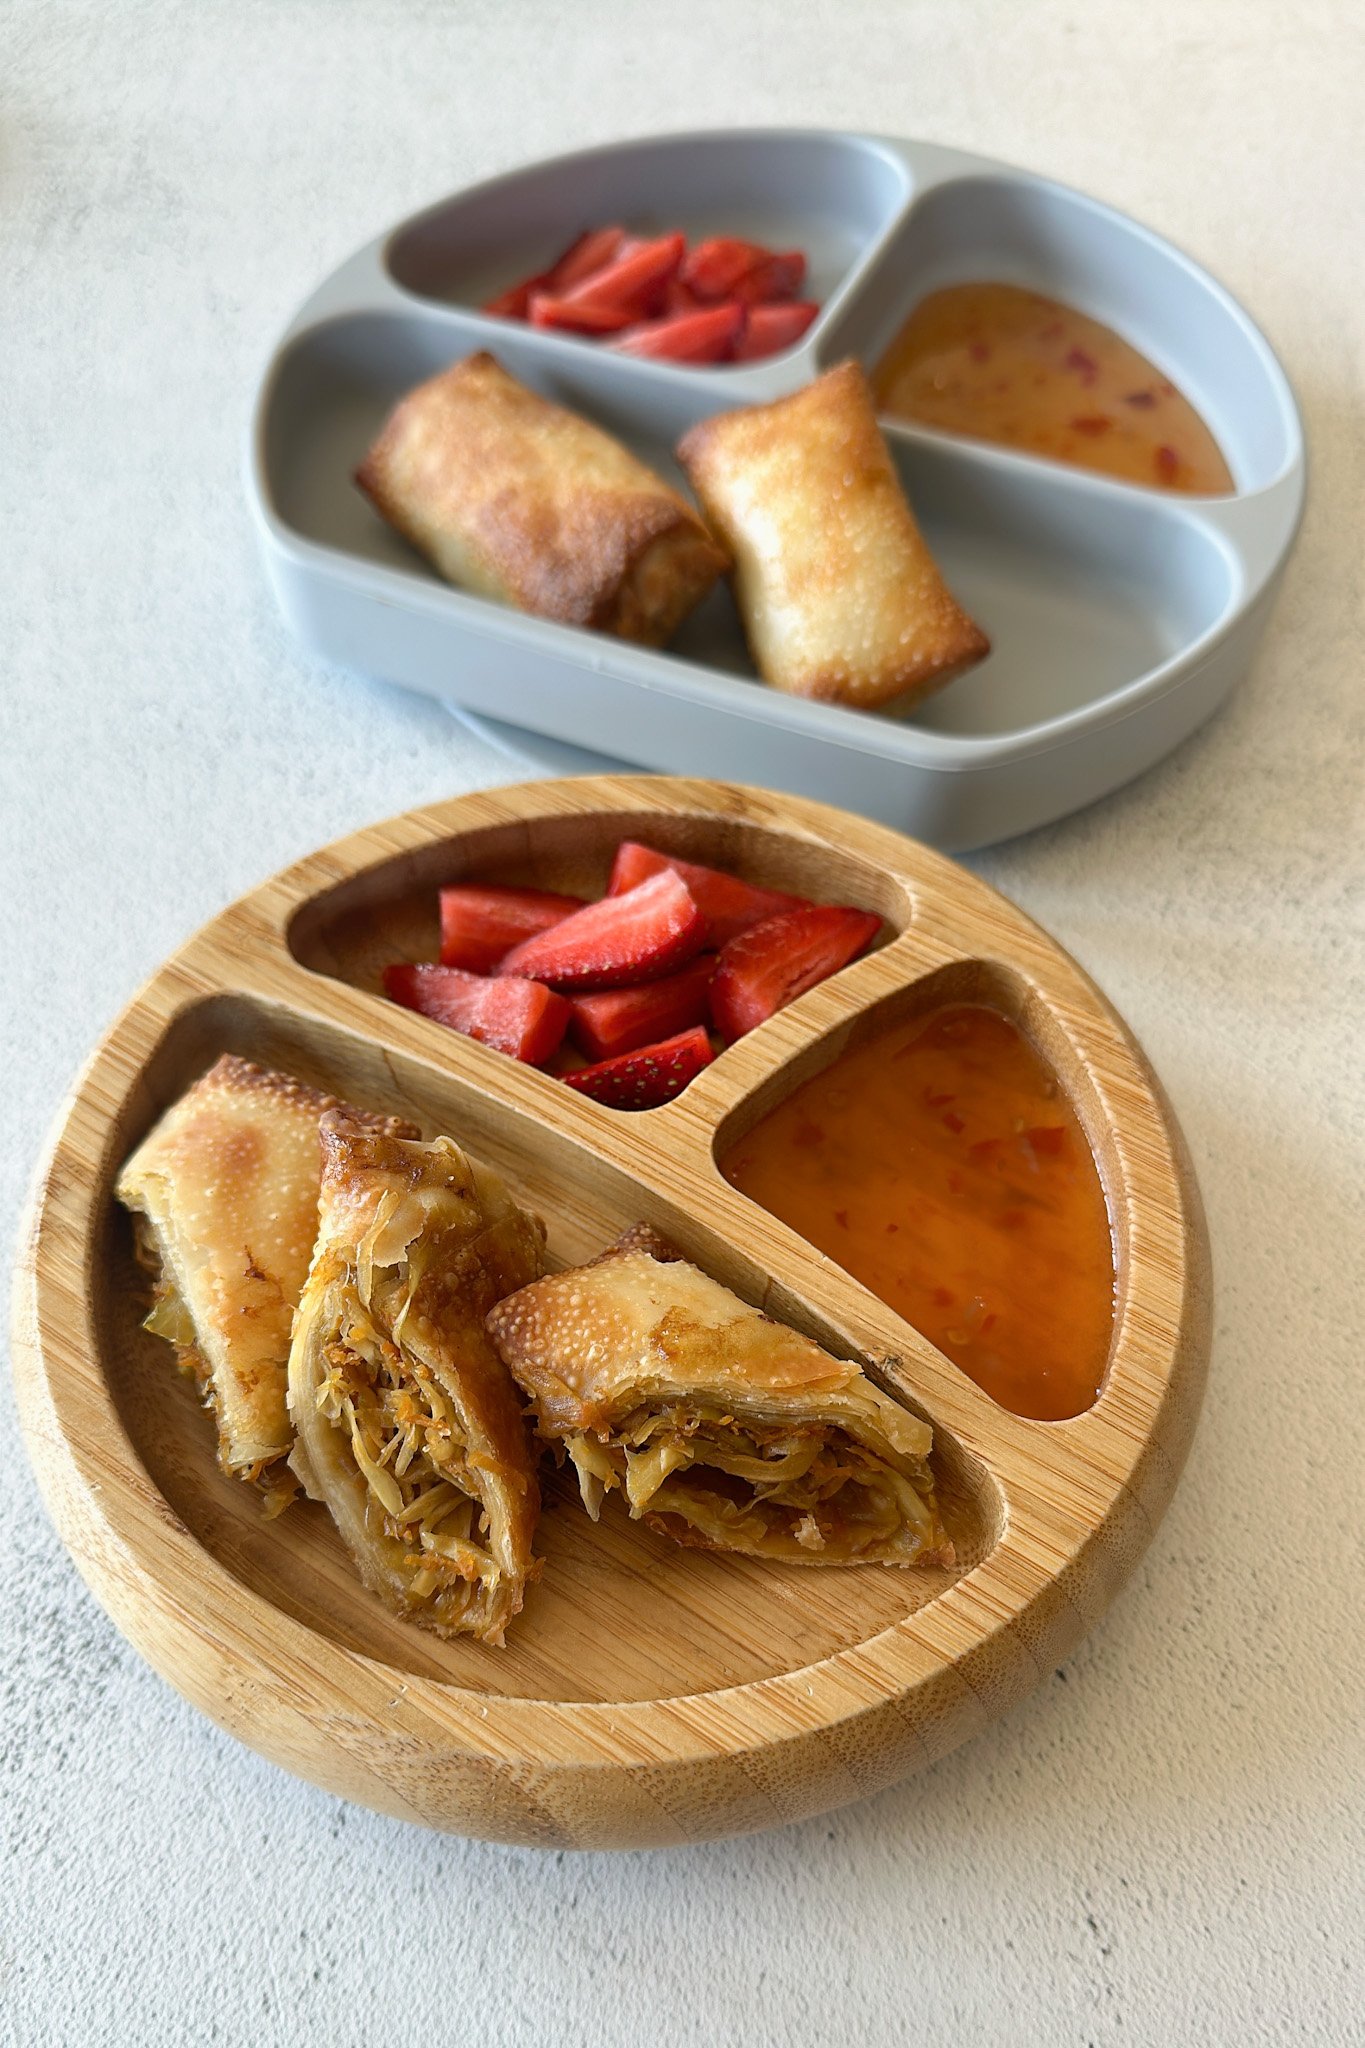 Air fried egg rolls served with sweet chili sauce and strawberries.